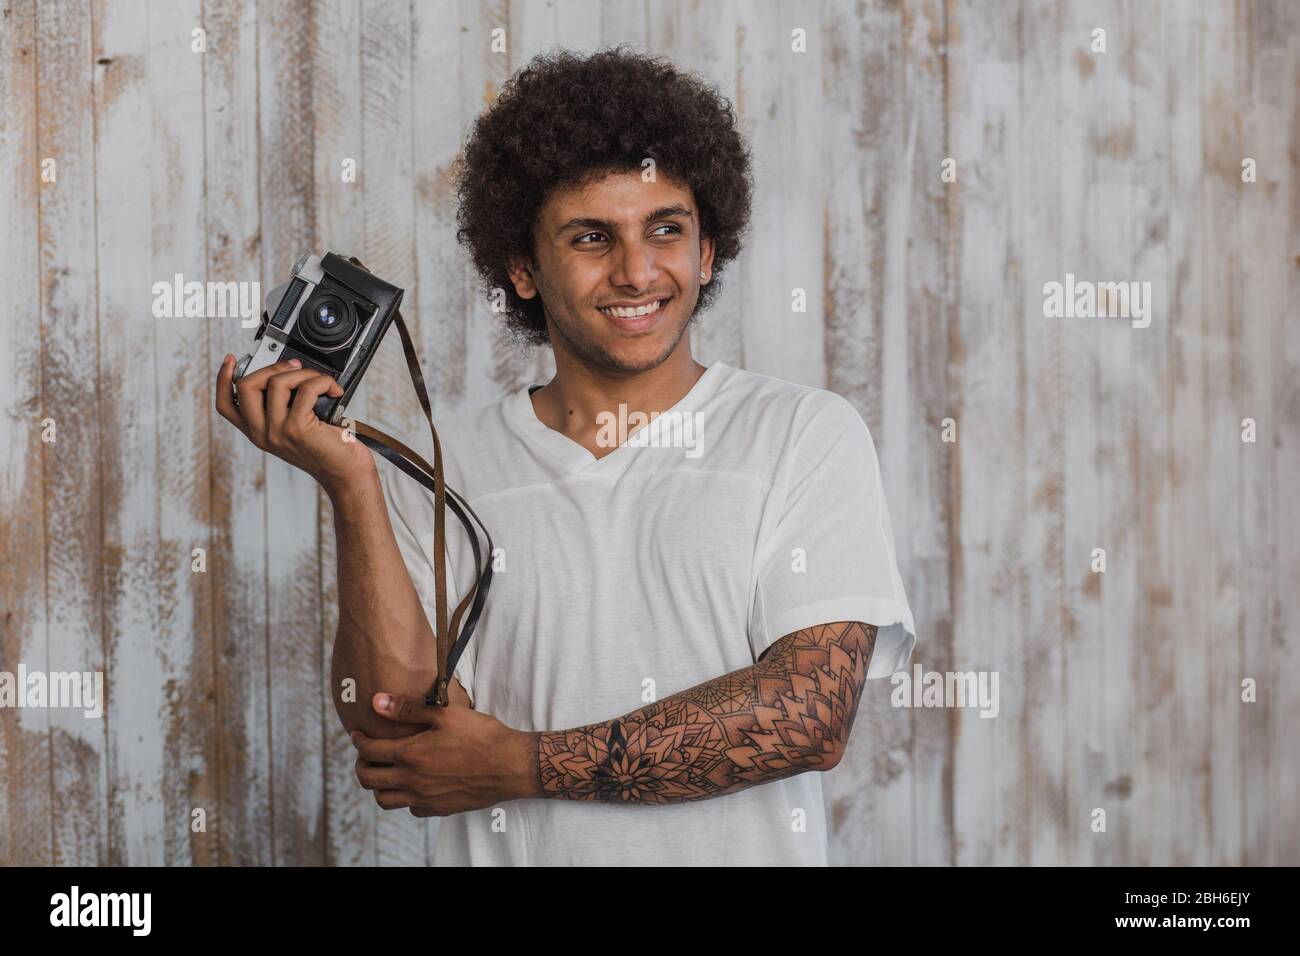 Portrait attractive and mulatto man with curly hair,holding a retro camera in his hand and smiling, behind him the old wooden background Stock Photo